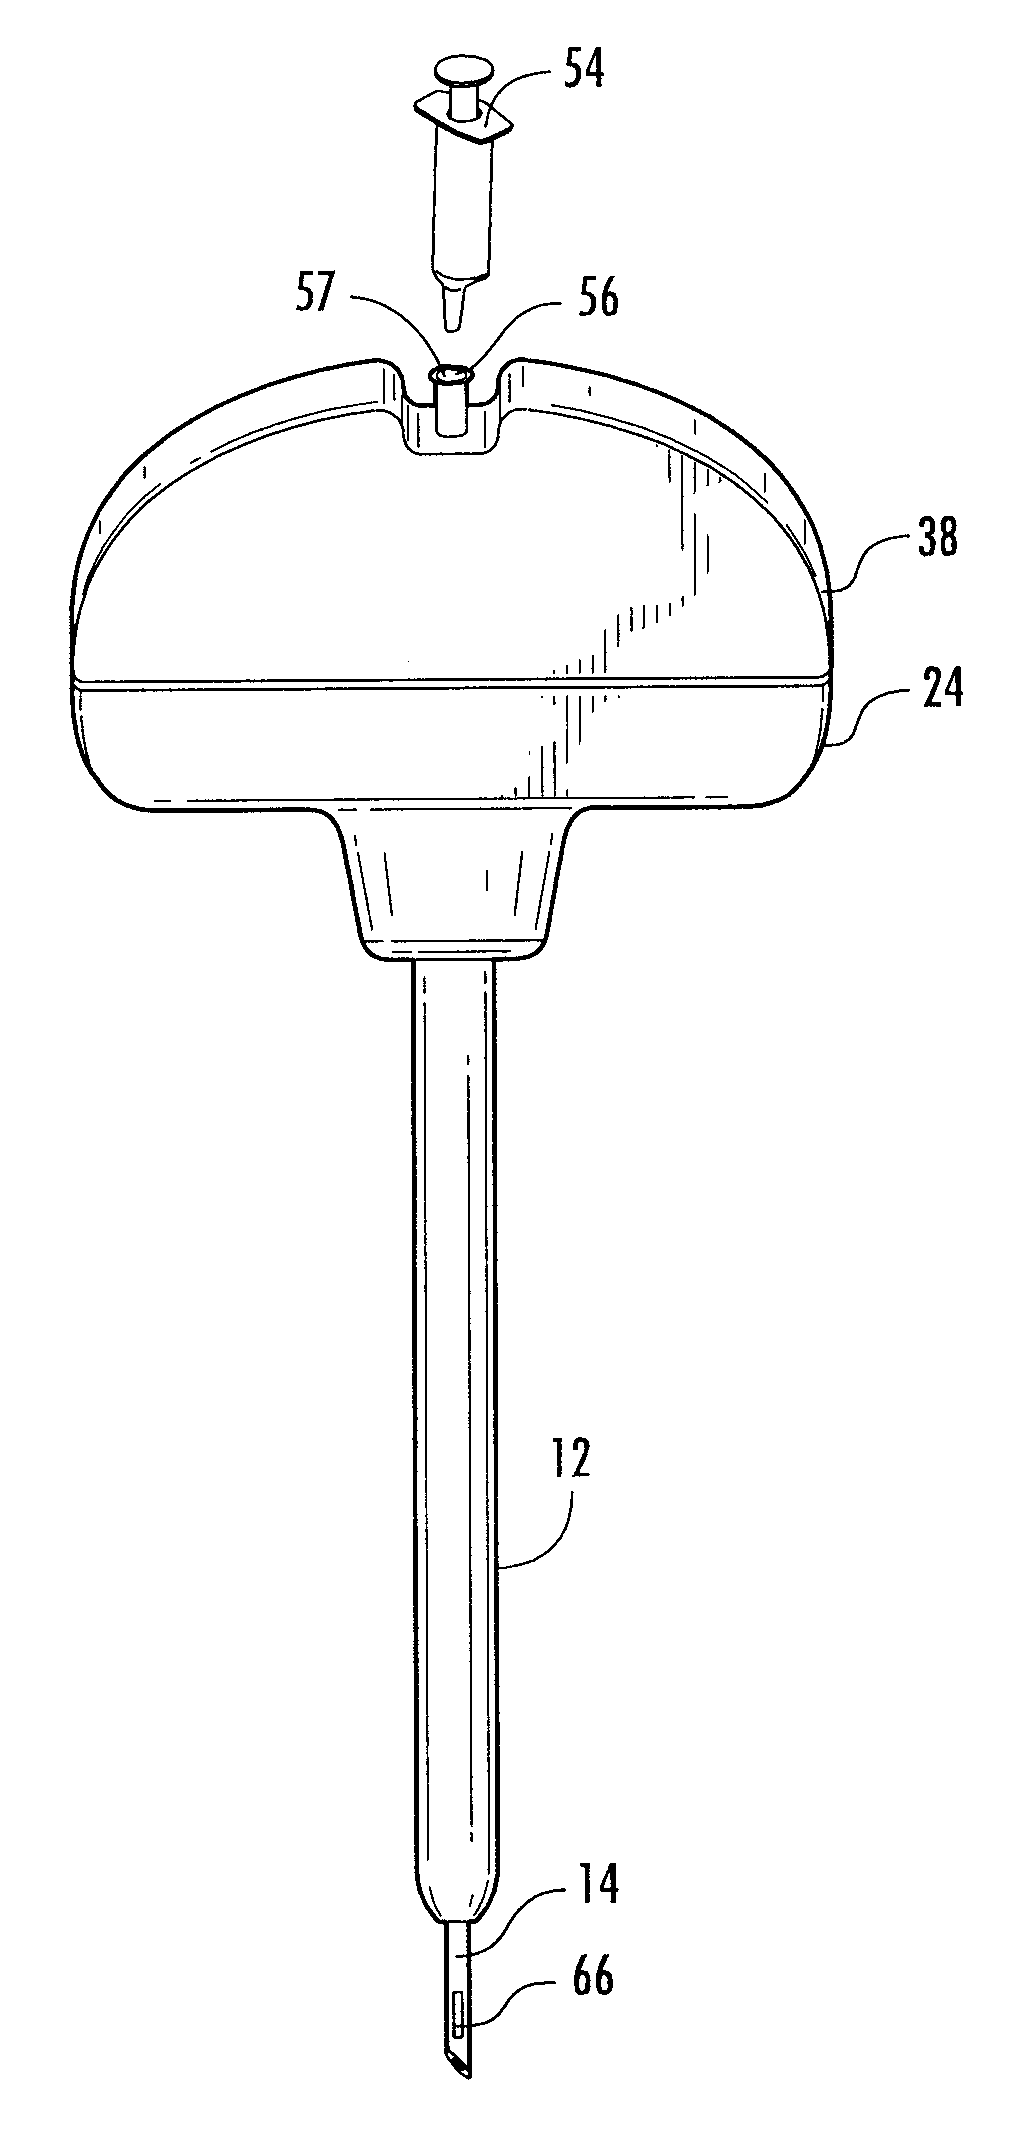 Instrument For Concurrent Injection Of Anesthesia And Removal Of Specimens From A Body